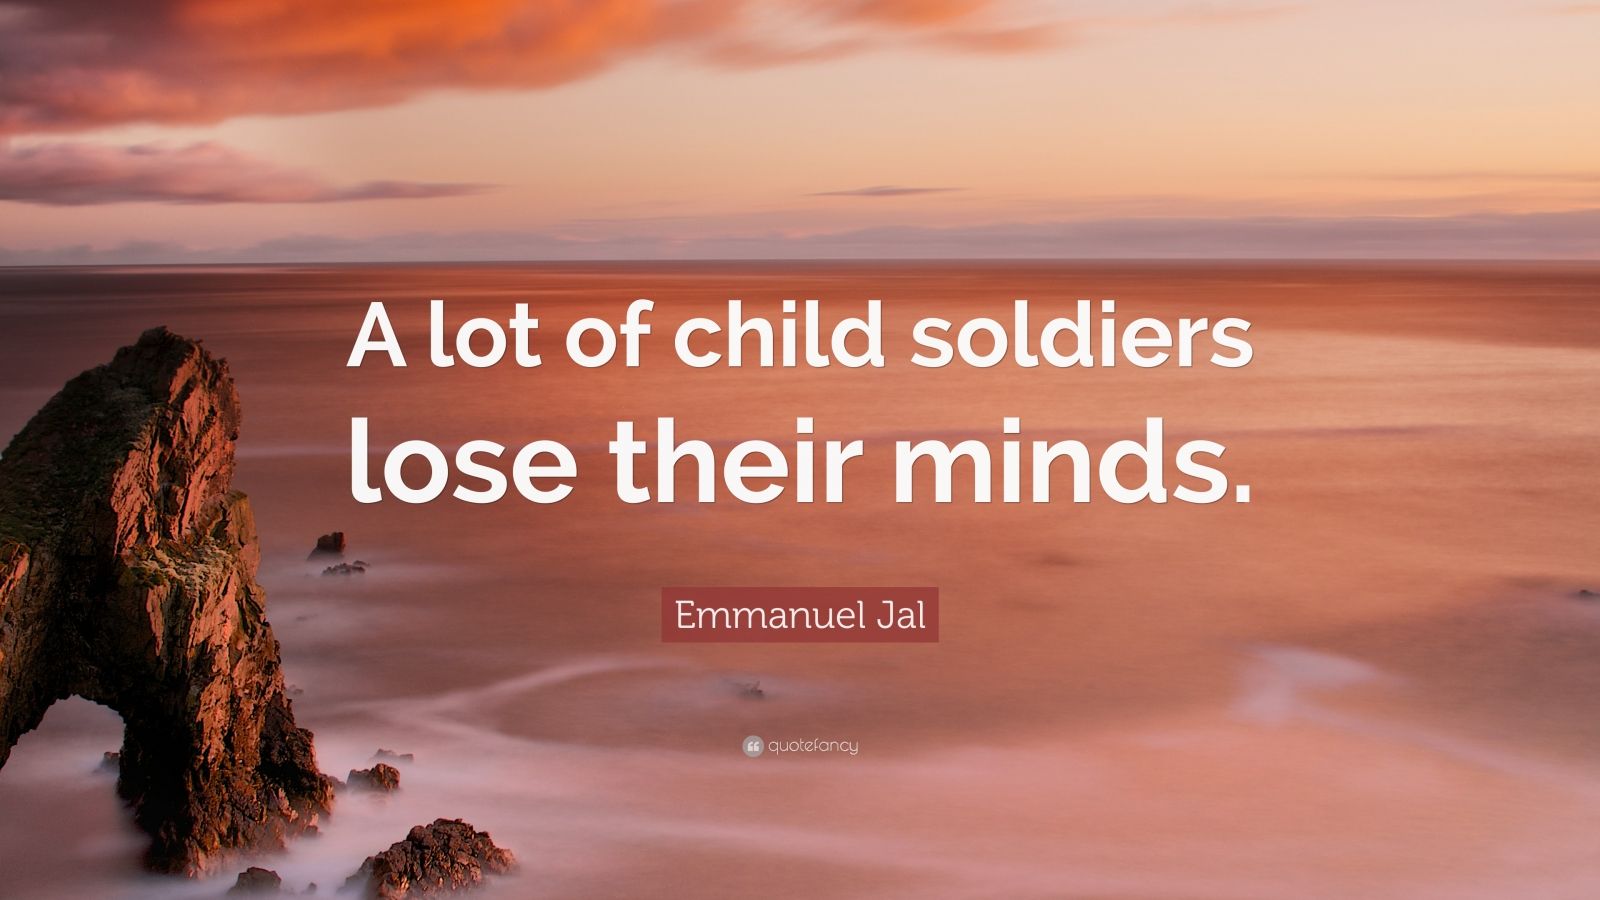 Emmanuel Jal Quote: "A lot of child soldiers lose their minds." (7 wallpapers) - Quotefancy